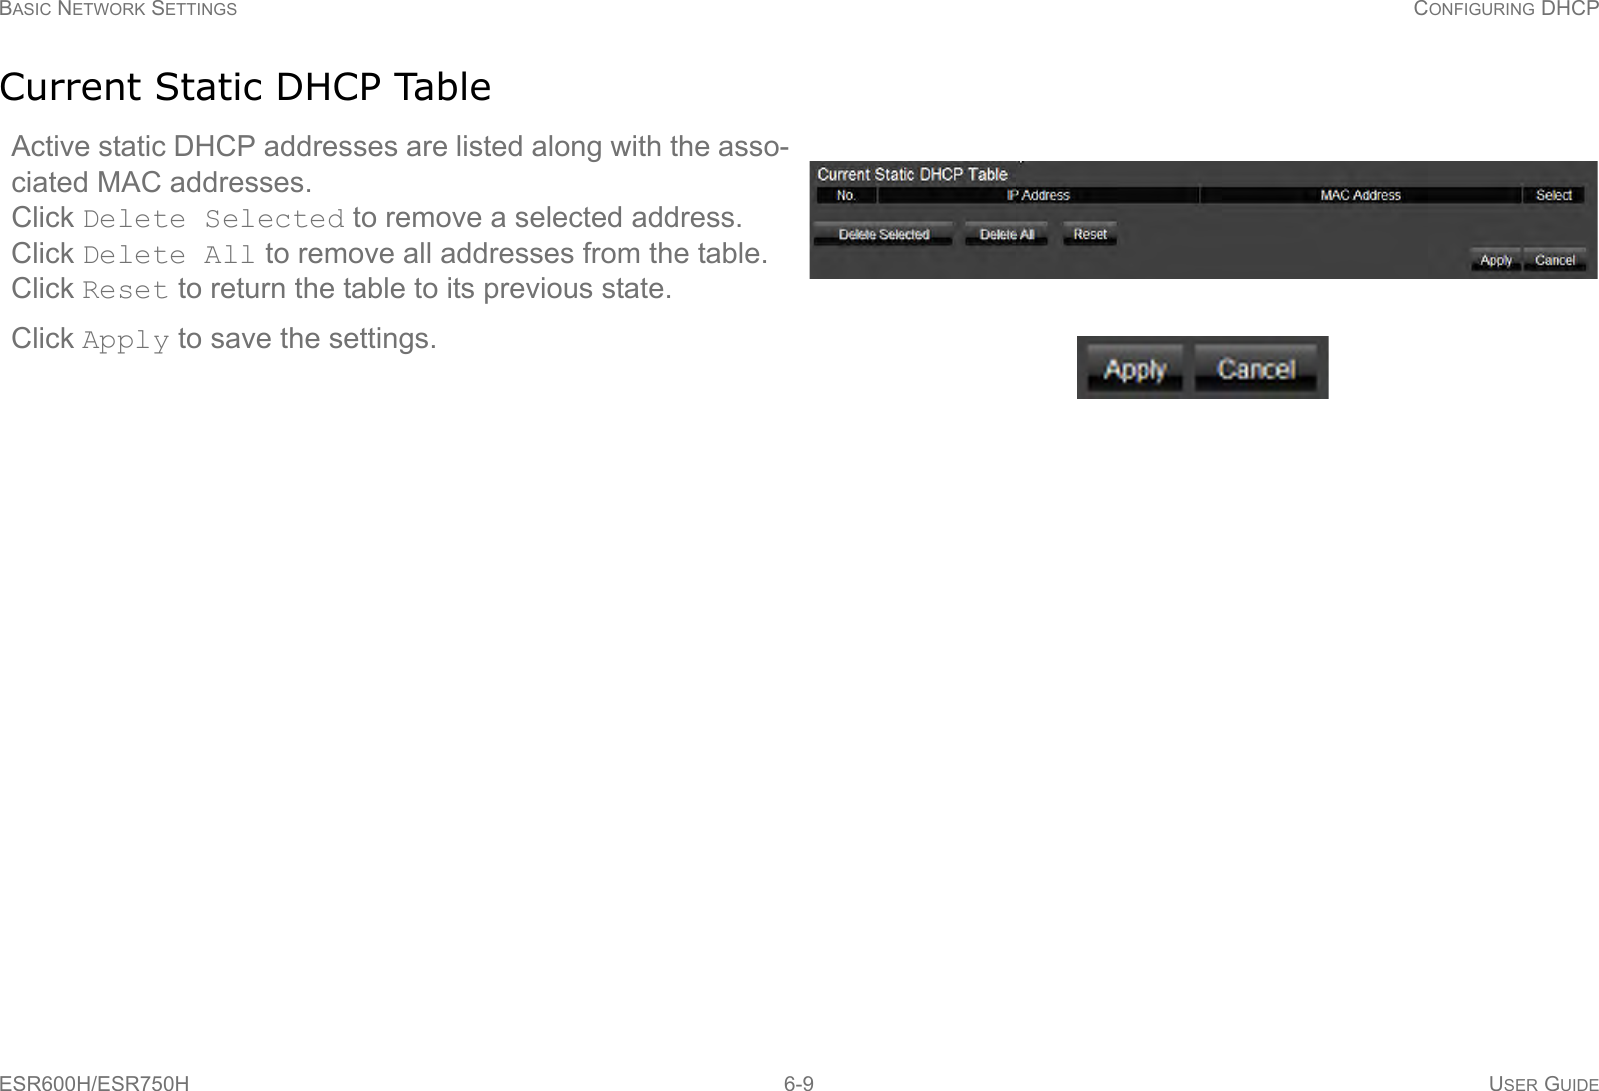 BASIC NETWORK SETTINGS CONFIGURING DHCPESR600H/ESR750H 6-9 USER GUIDECurrent Static DHCP TableActive static DHCP addresses are listed along with the asso-ciated MAC addresses. Click Delete Selected to remove a selected address. Click Delete All to remove all addresses from the table. Click Reset to return the table to its previous state.Click Apply to save the settings.